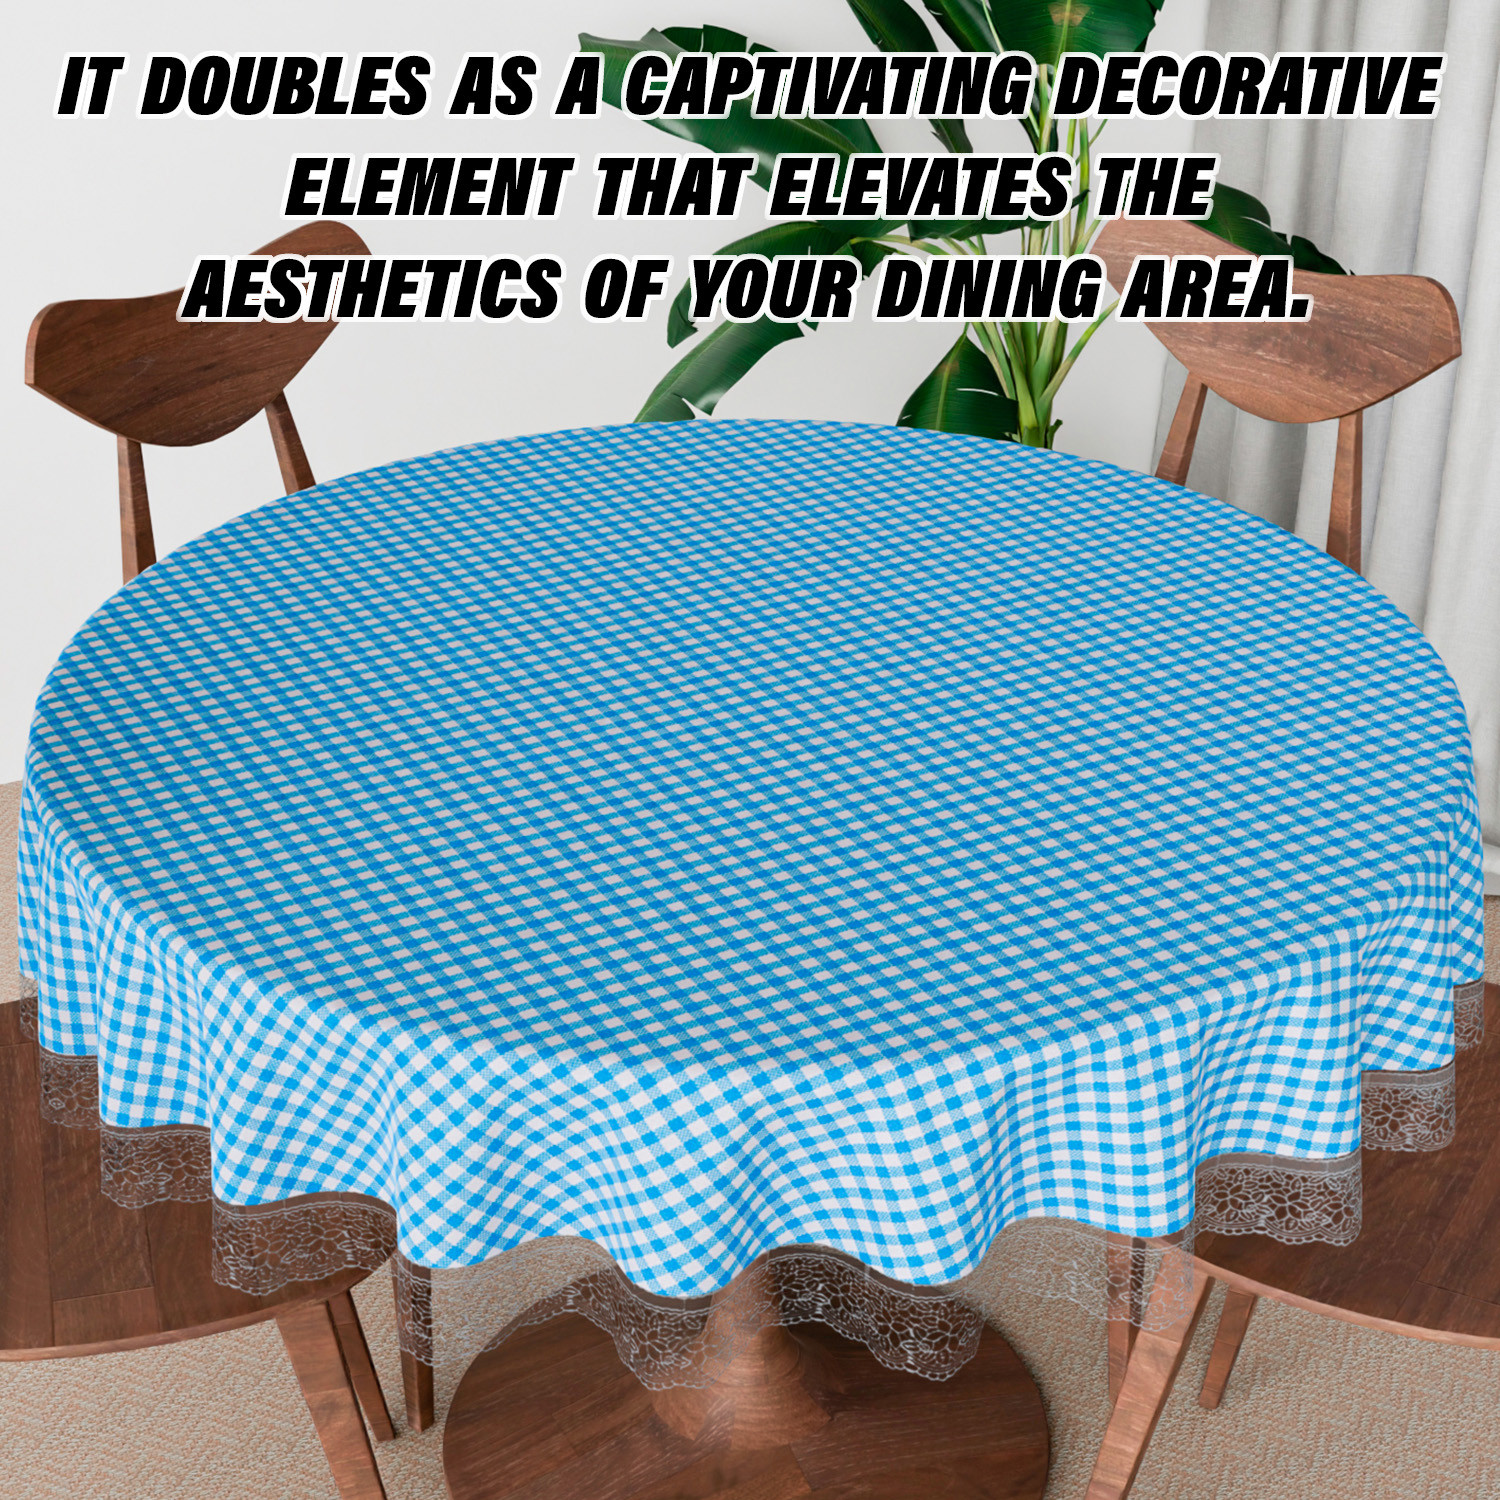 Kuber Industries Round Table Cover | Table Cloth for Round Tables | 4 Seater Round Table Cloth | Barik Check Kitchen Dining Tablecloth | Tabletop Cover | 60 Inch | Blue